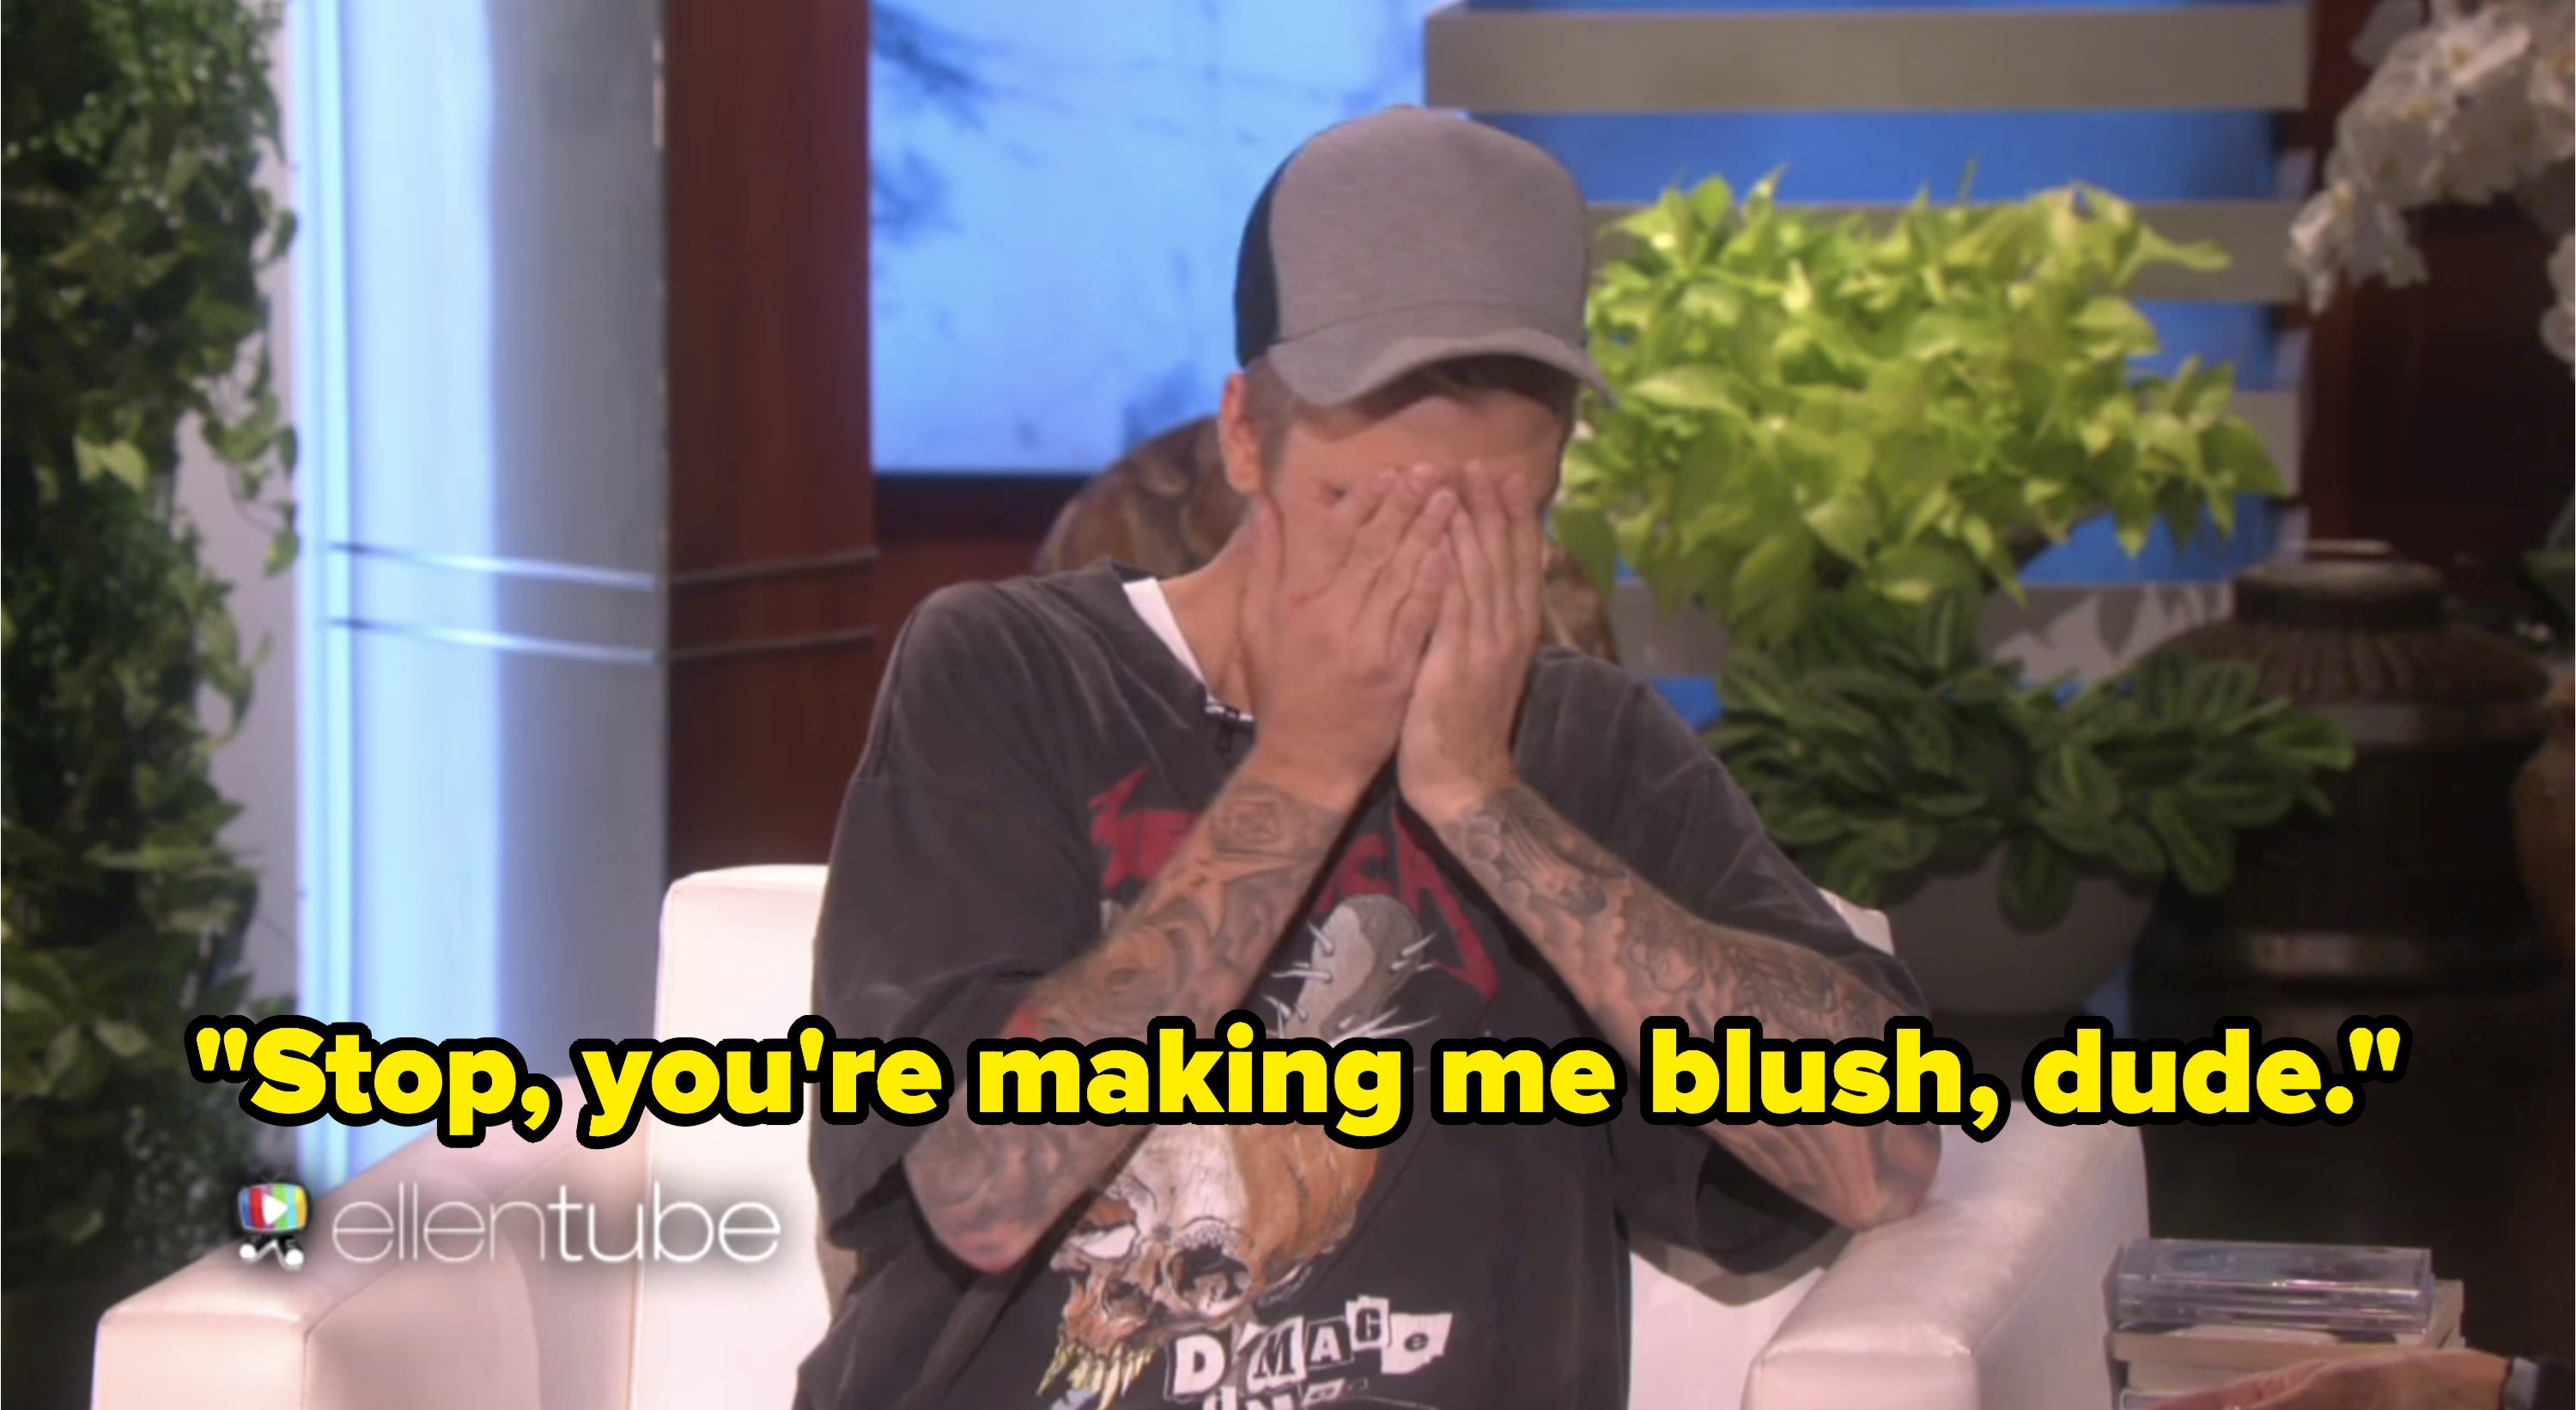 Justin Bieber appearing on The Ellen Show and saying &quot;Stop, you&#x27;re making me blush dude&quot;